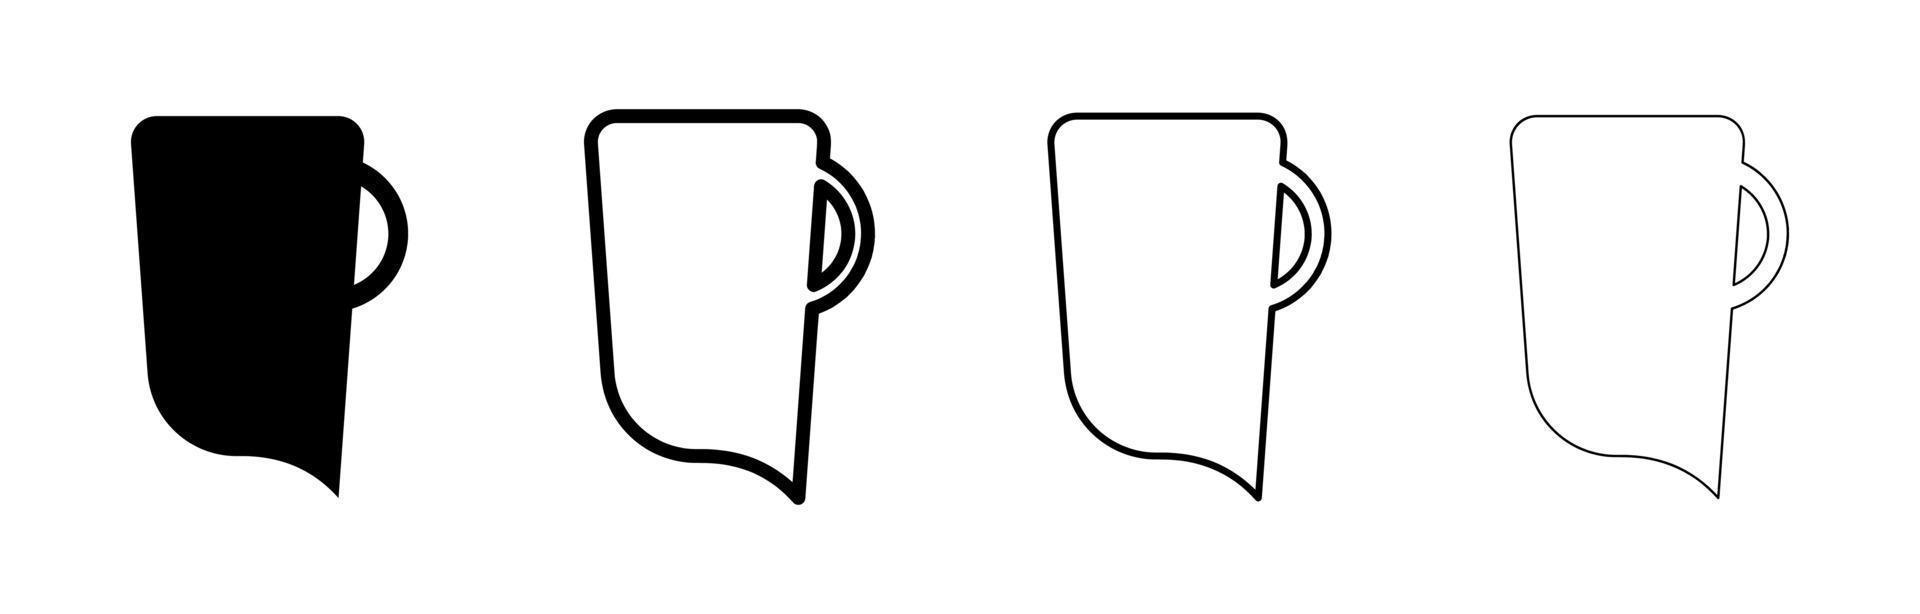 Cup location label. Coffee cup icon with speech bubble. Tall glass. Writing area label. Editable drawing. Various icon set. Vector on a white background.